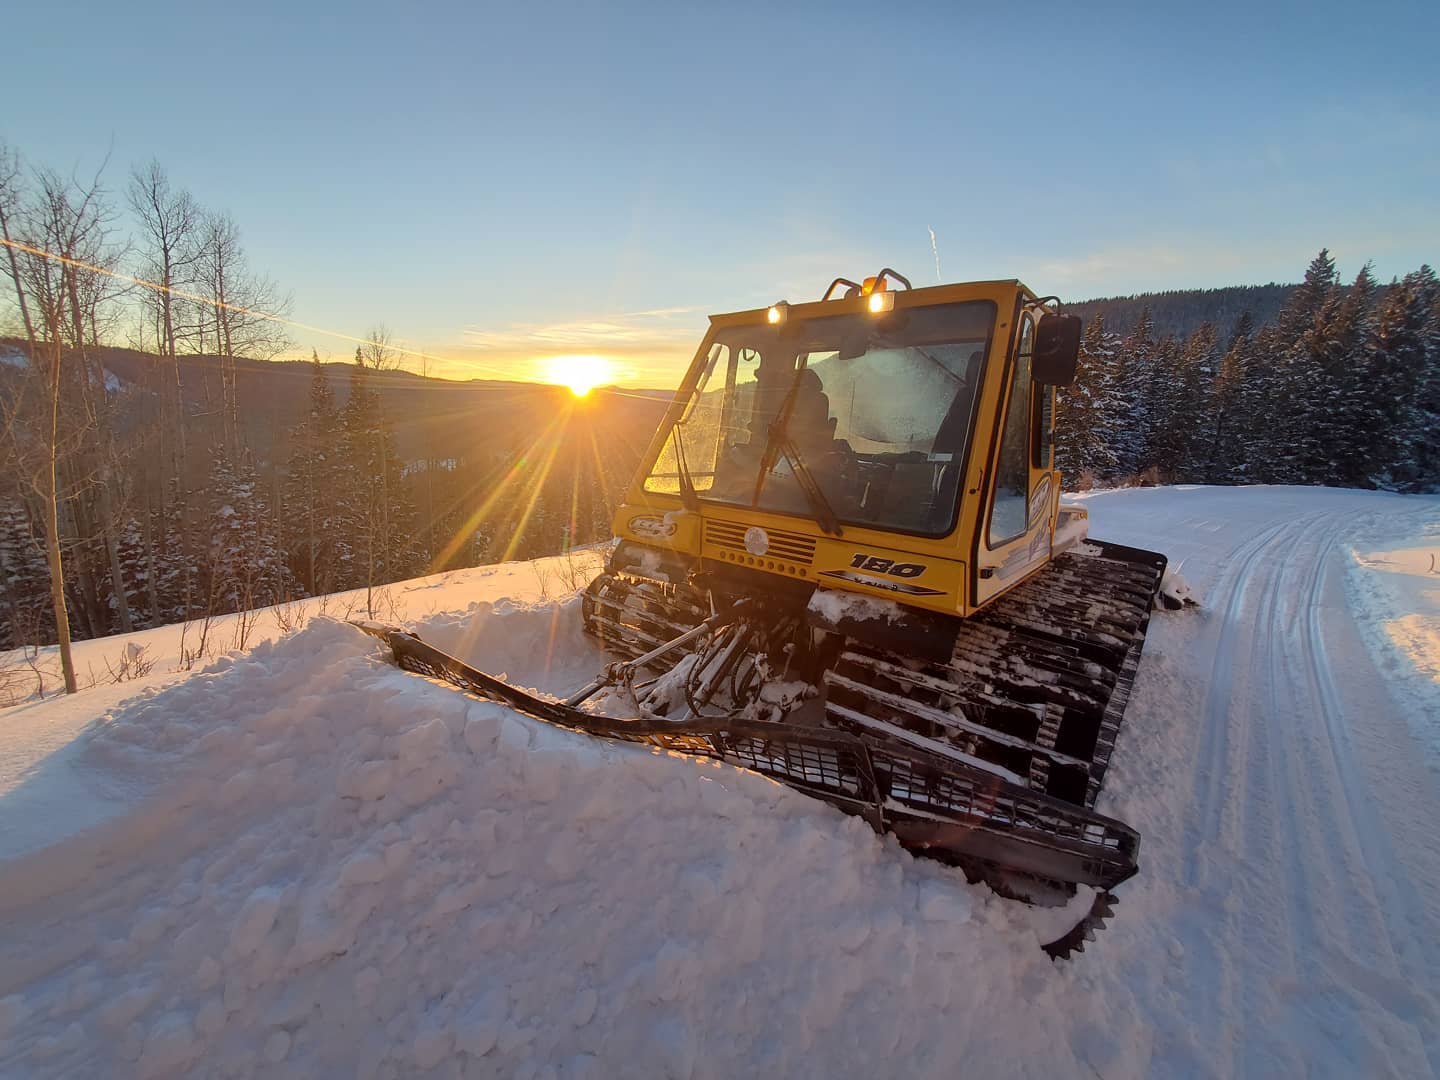 Purgatory's Snowcat dinner is the ultimate ride